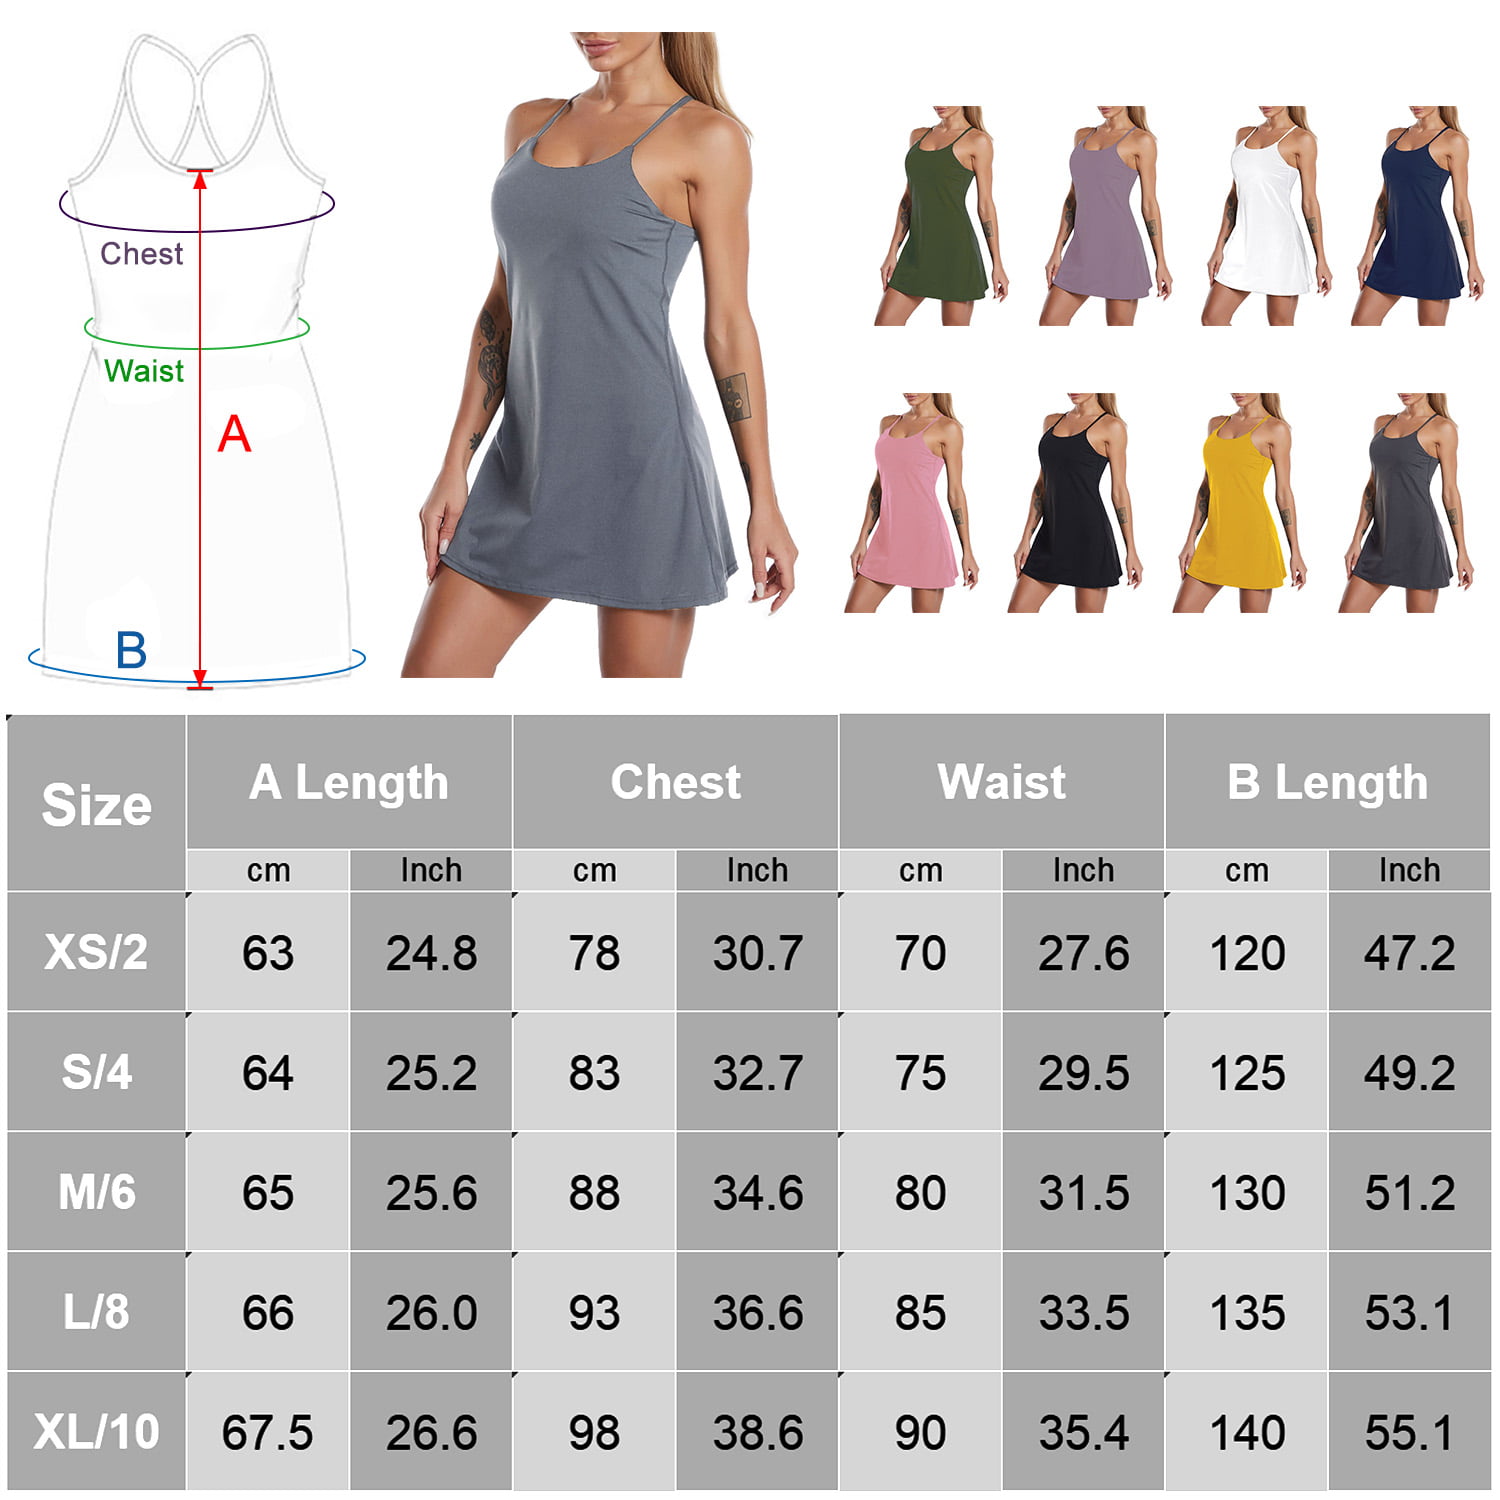 Tennis Dress for Women with Built in Bra, Women's Loose Cutout Golf  Sundress Athletic Workout Dresses Activewear